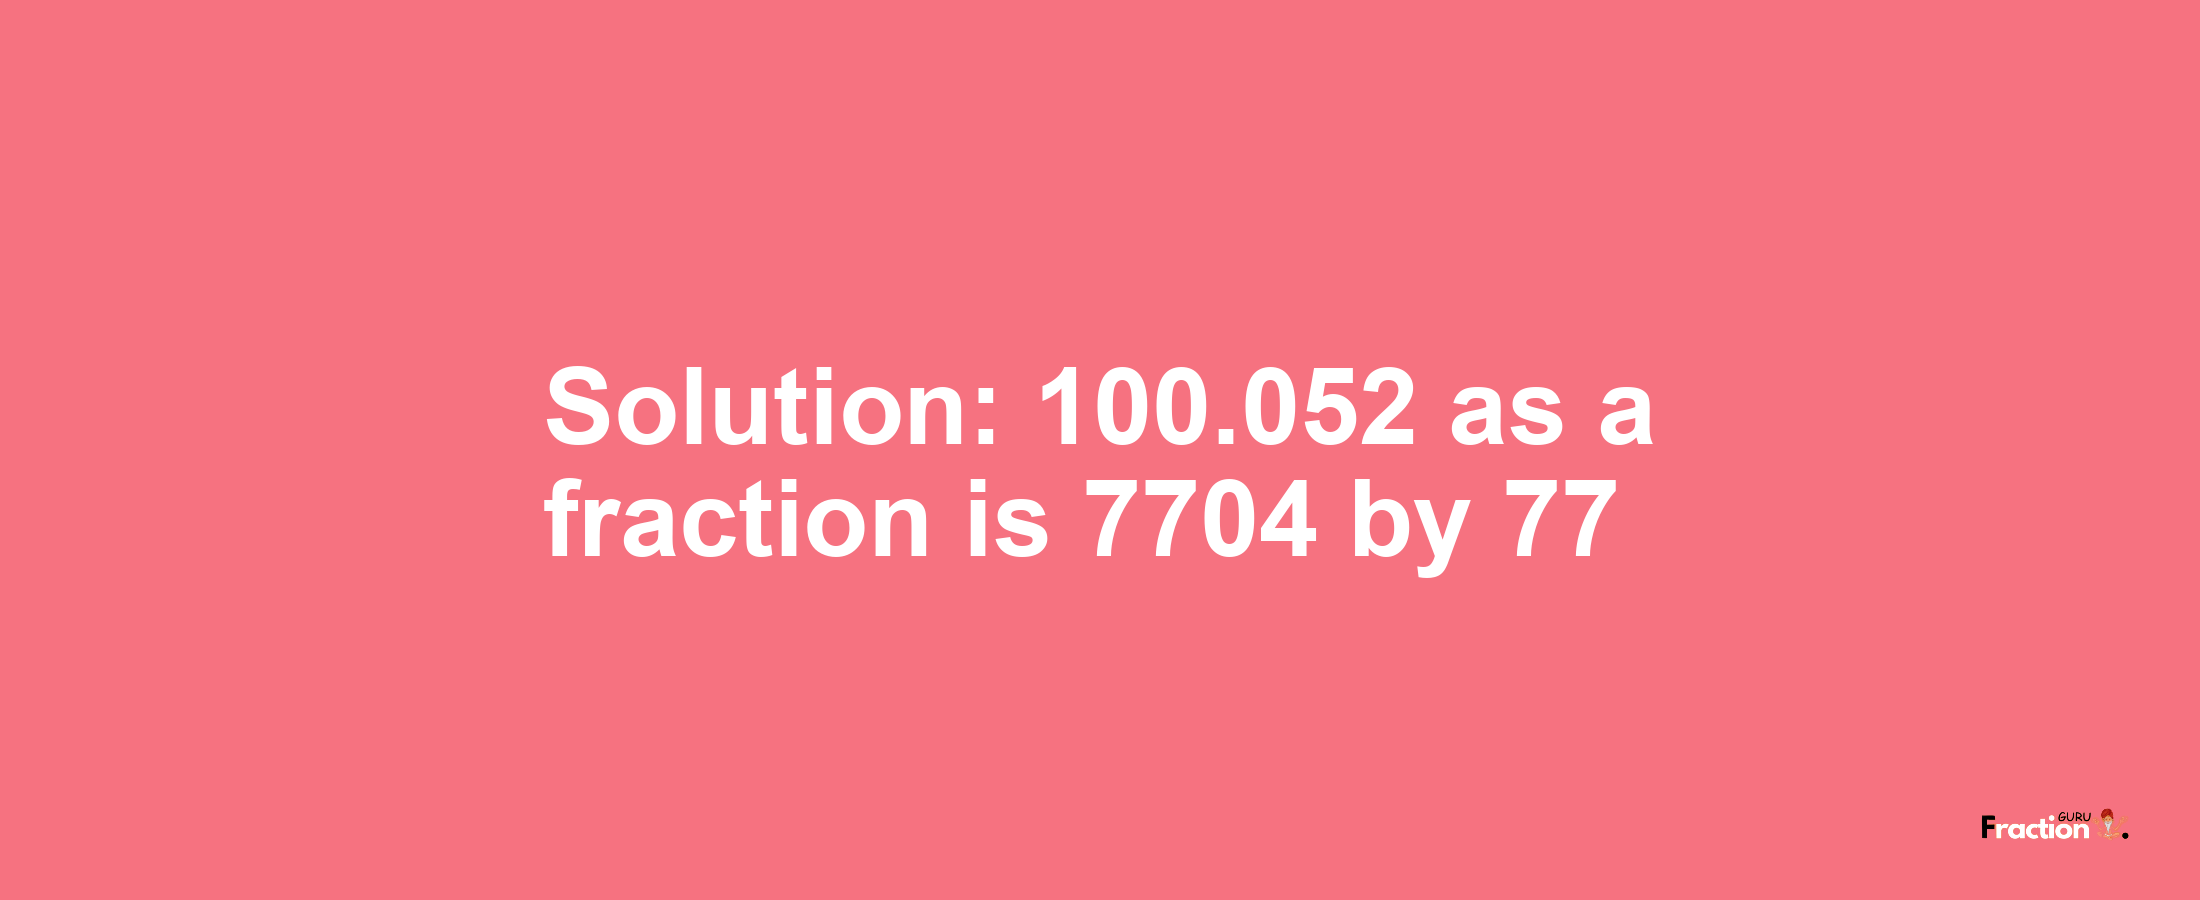 Solution:100.052 as a fraction is 7704/77